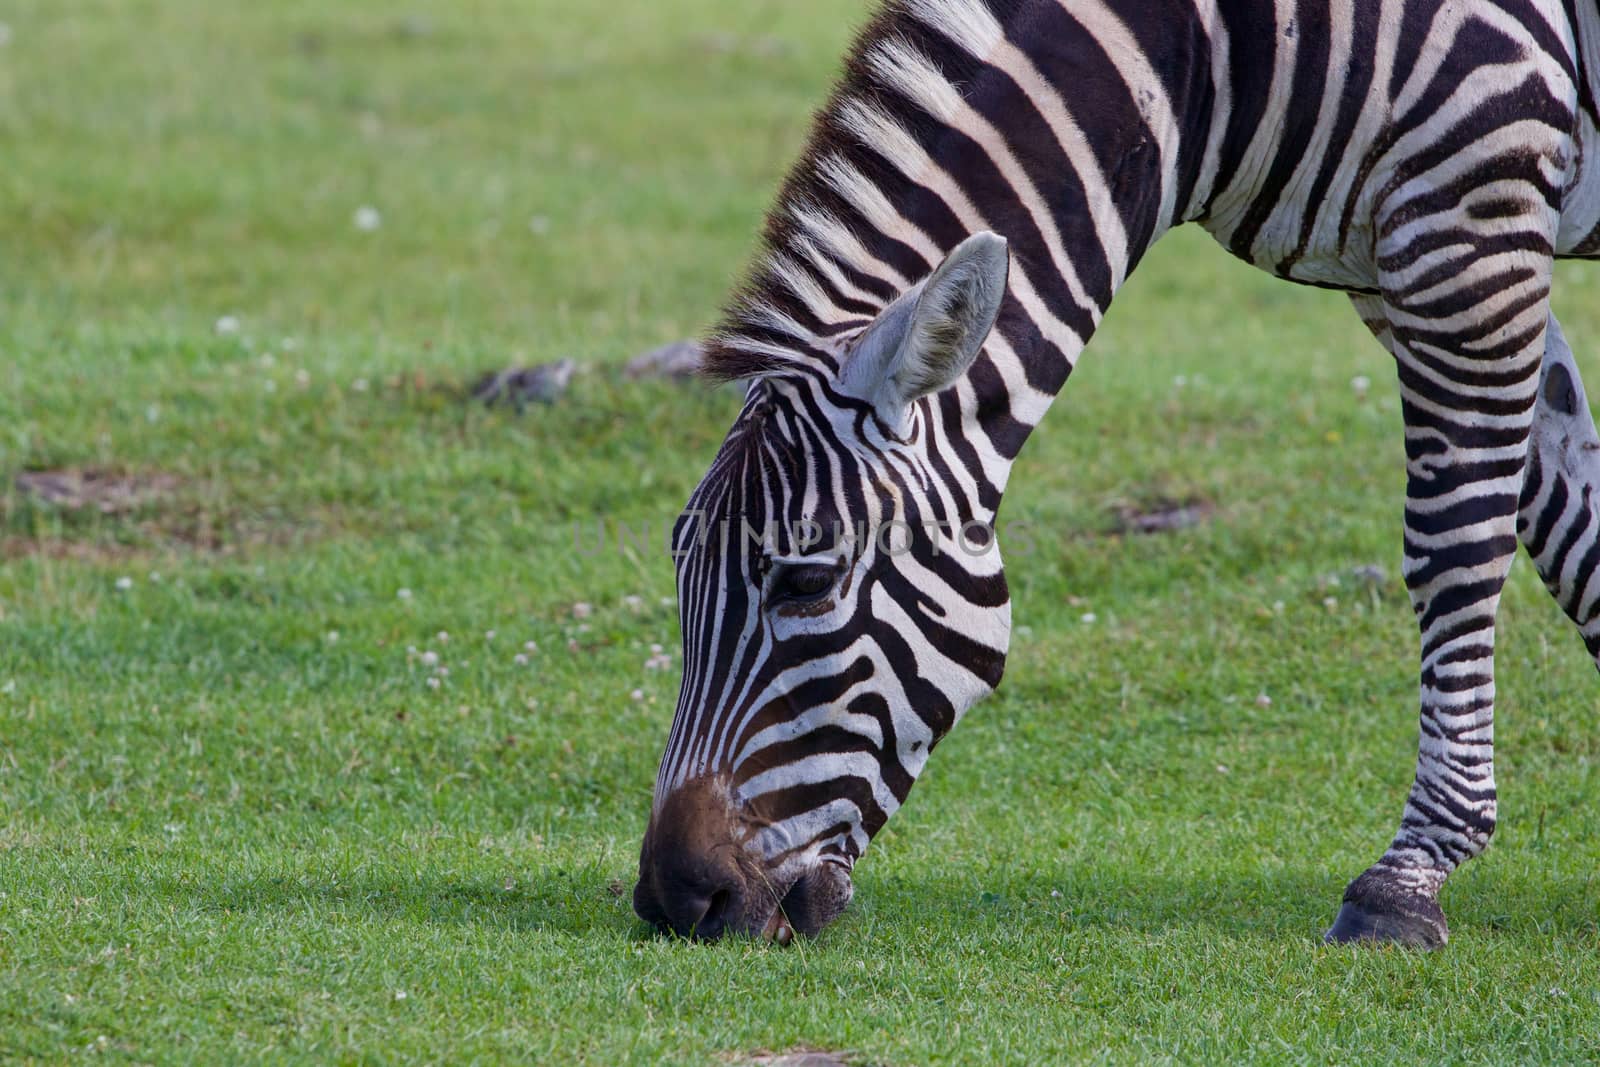 The portrait of a zebra eating the grass